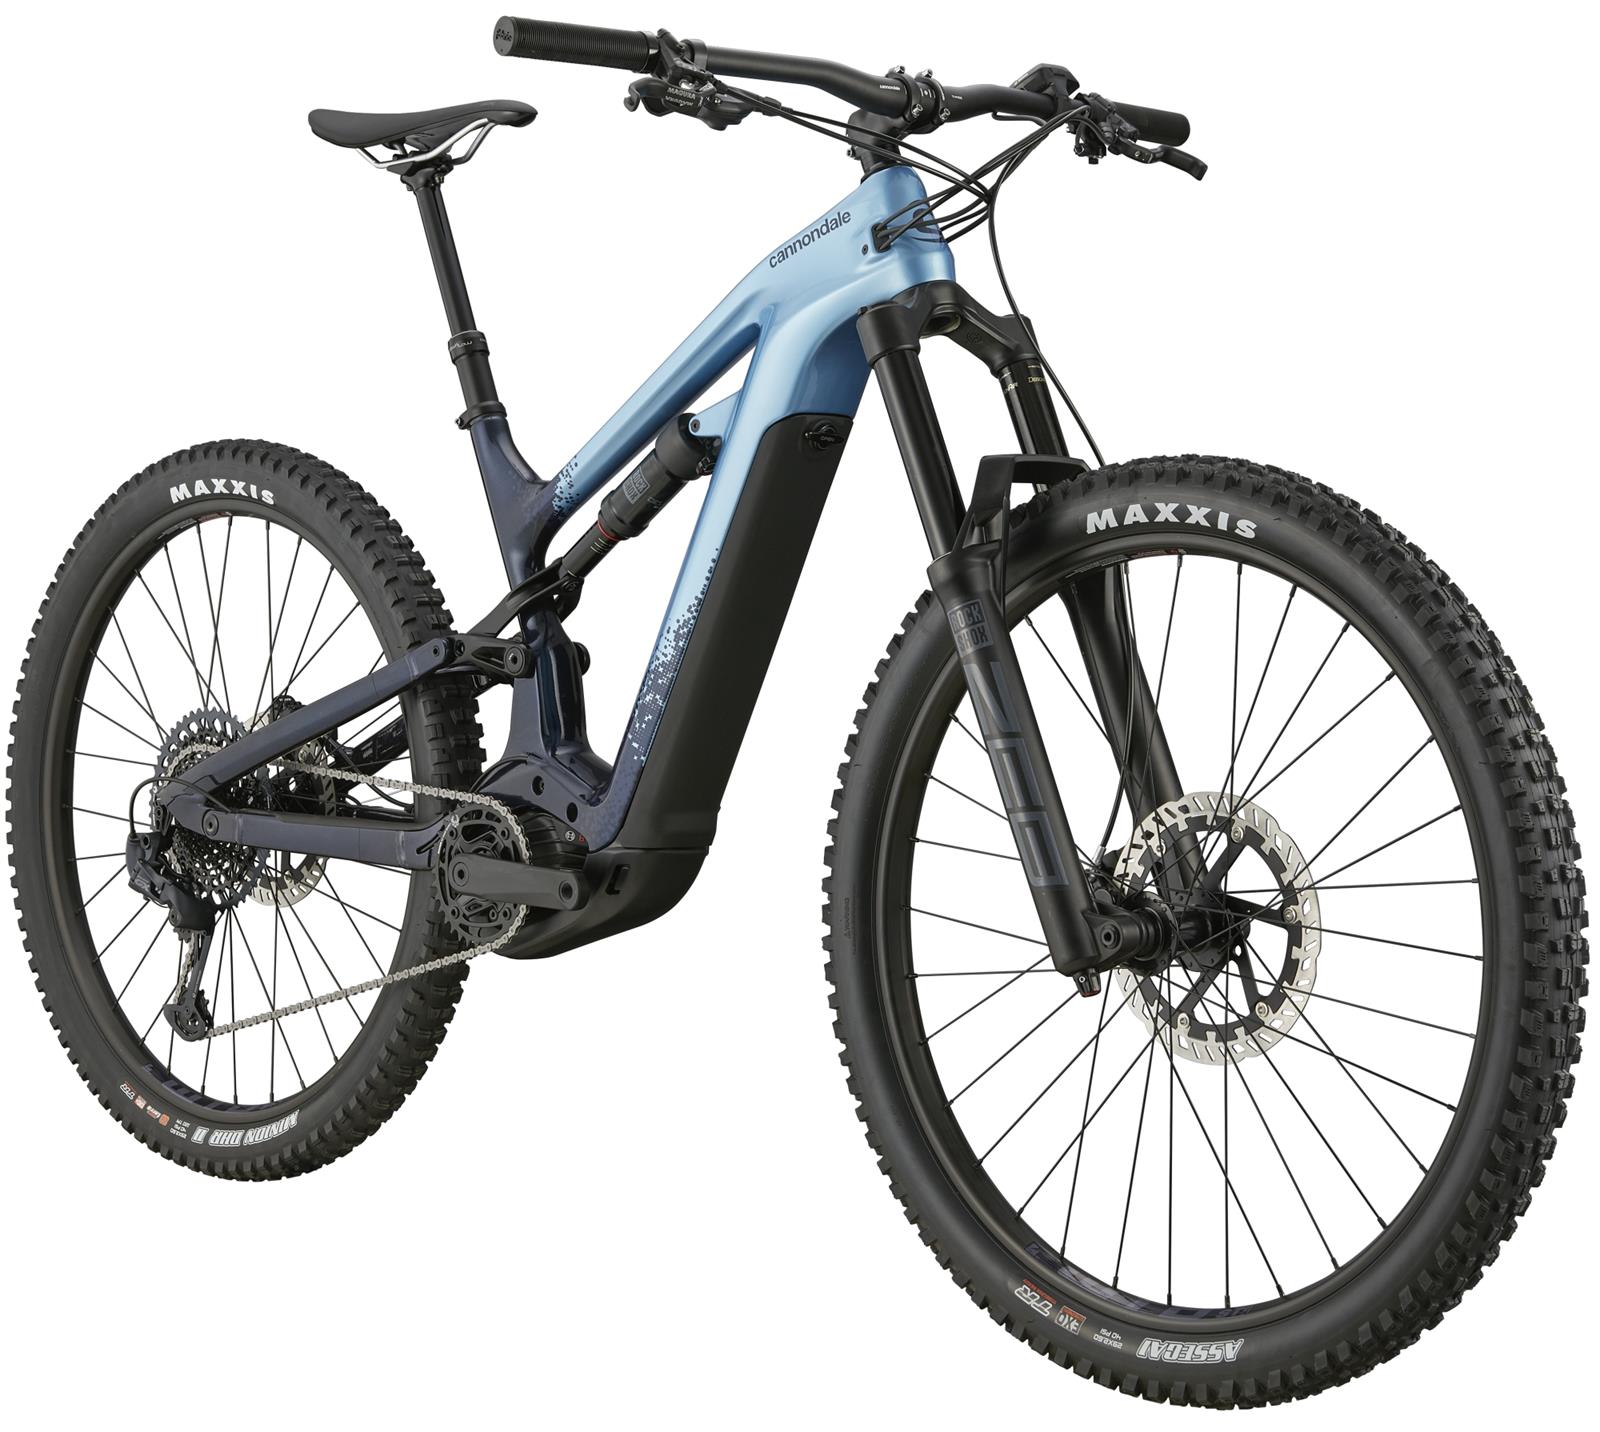 CANNONDALE Moterra Neo Crb 2 (2021)